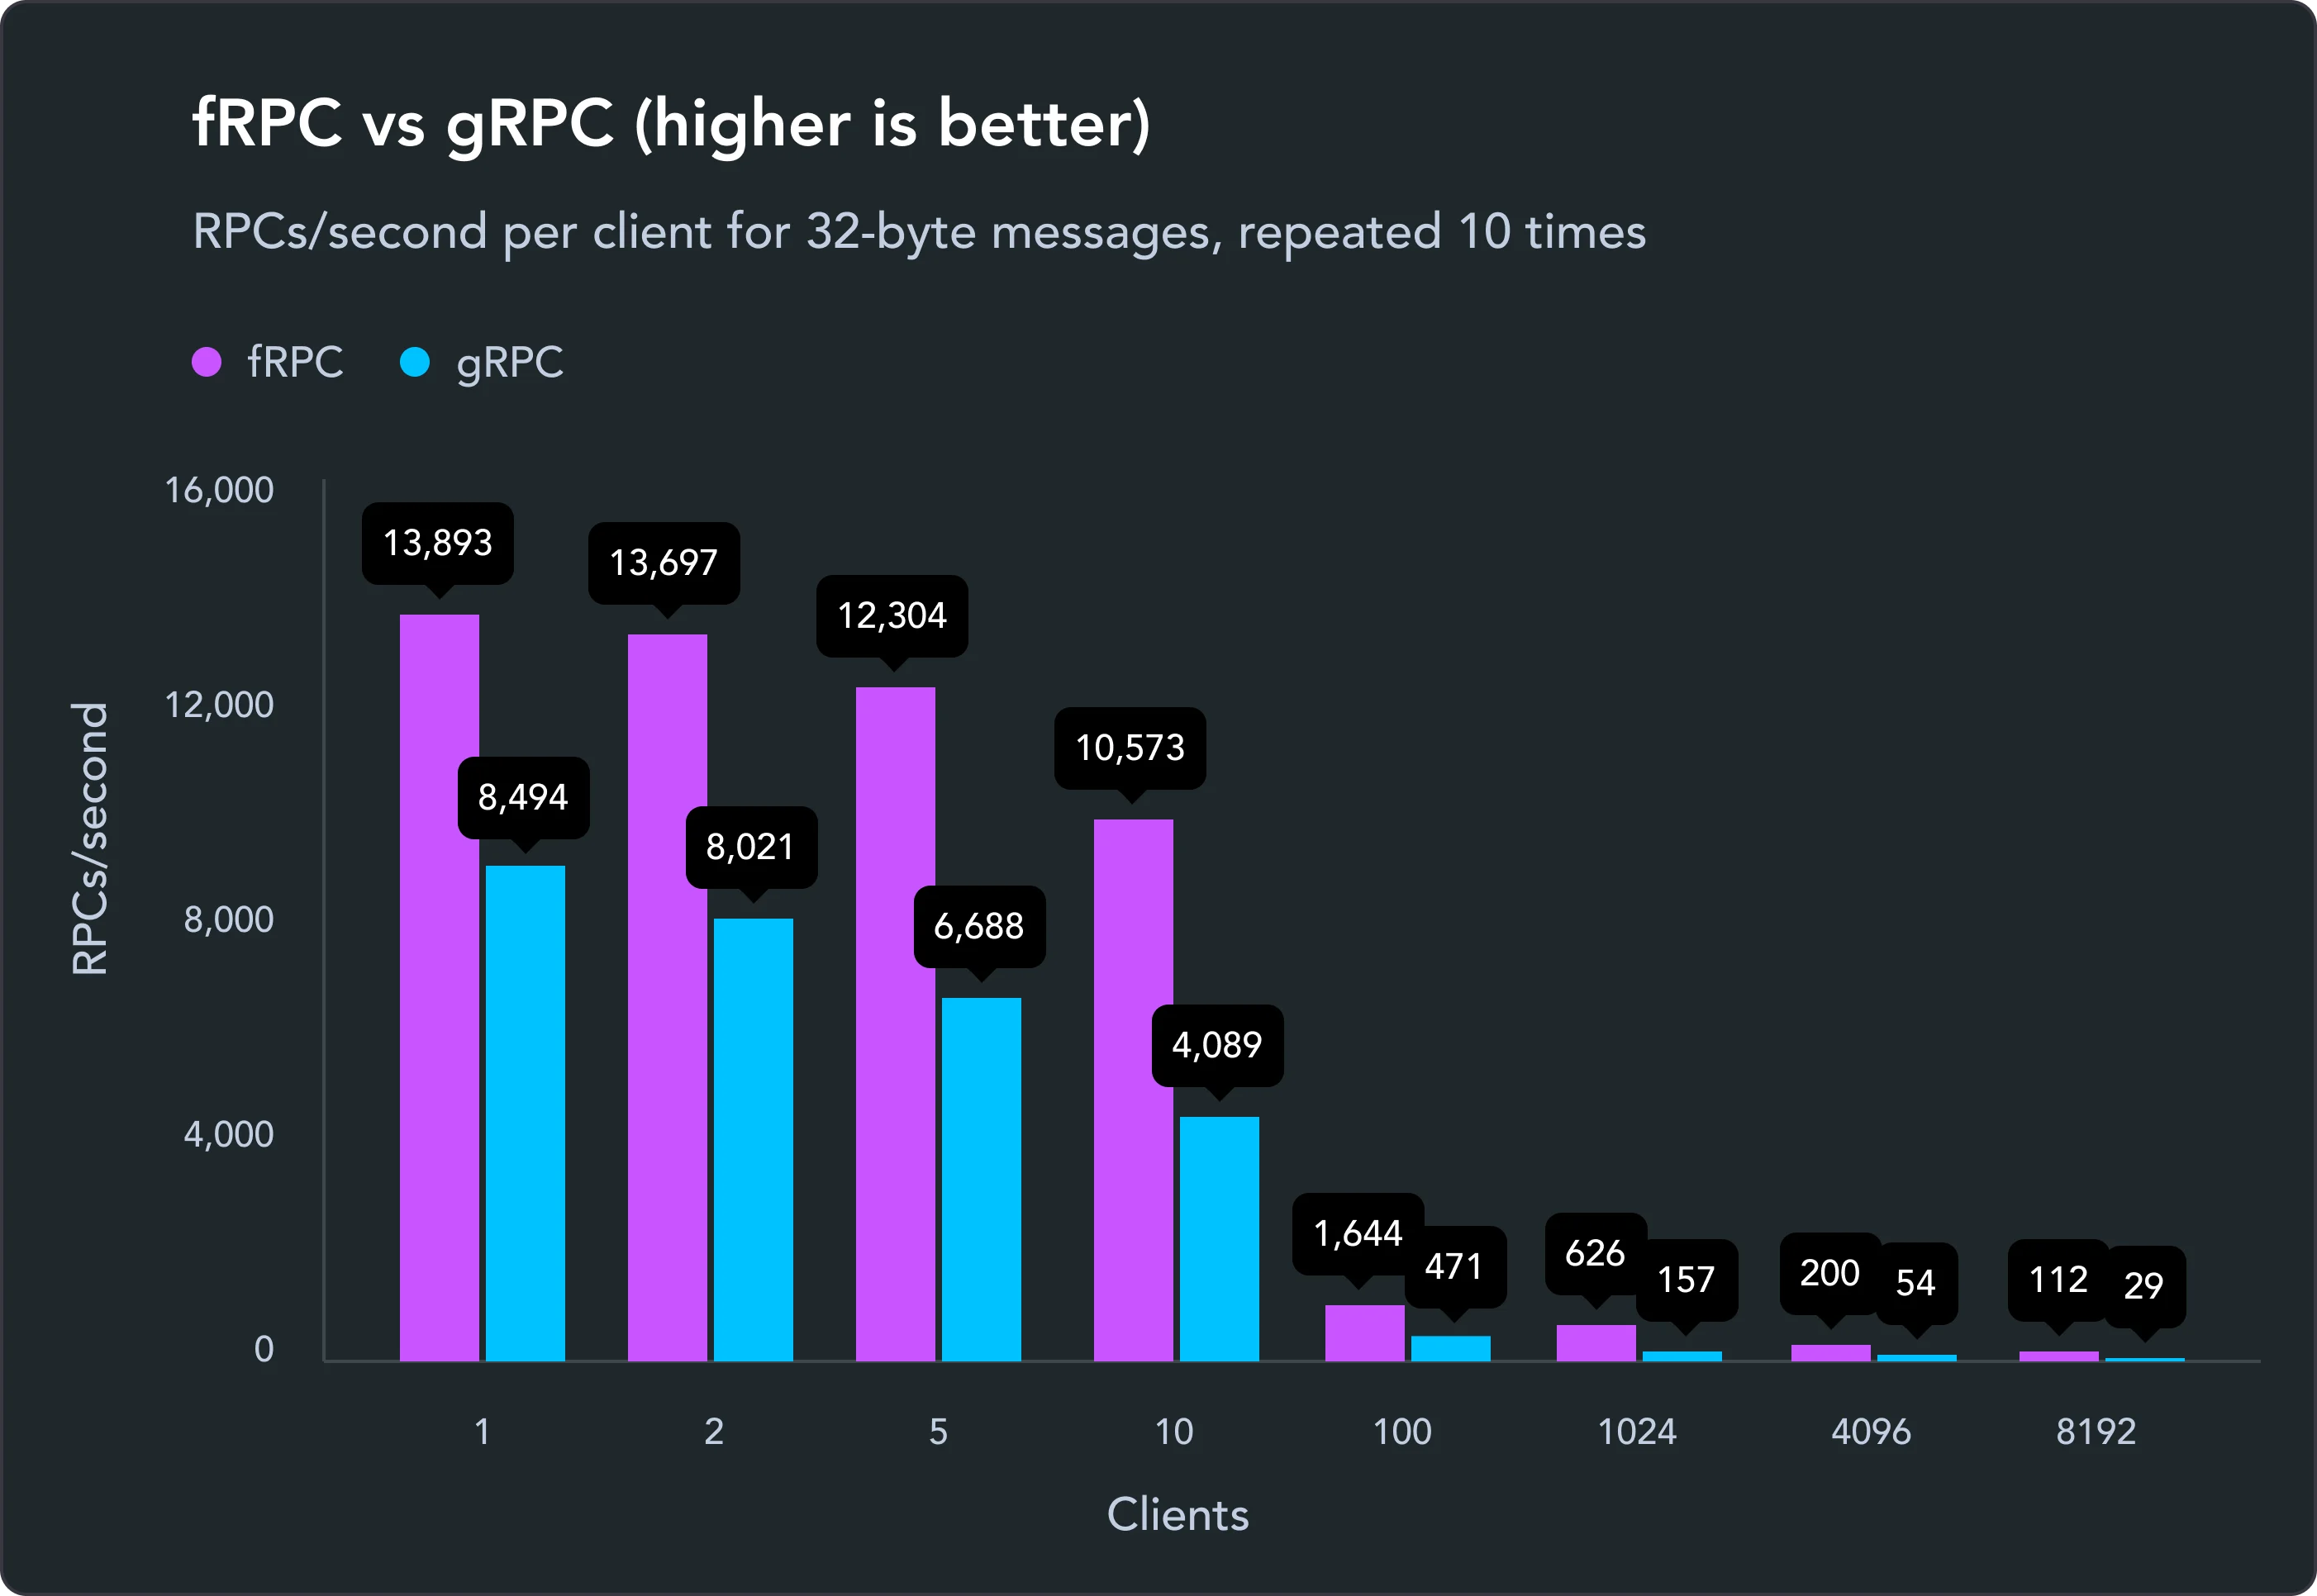 A graph showing a comparison between fRPC and gRPC of RPCs per second for 32-byte messages, repeated 10 times. With a single client connected, fRPC achieves 13,893 RPCs vs gRPC's 8,494. With 8,192 clients, fRPC achieves 112 RPCs per second vs gRPC's 29.